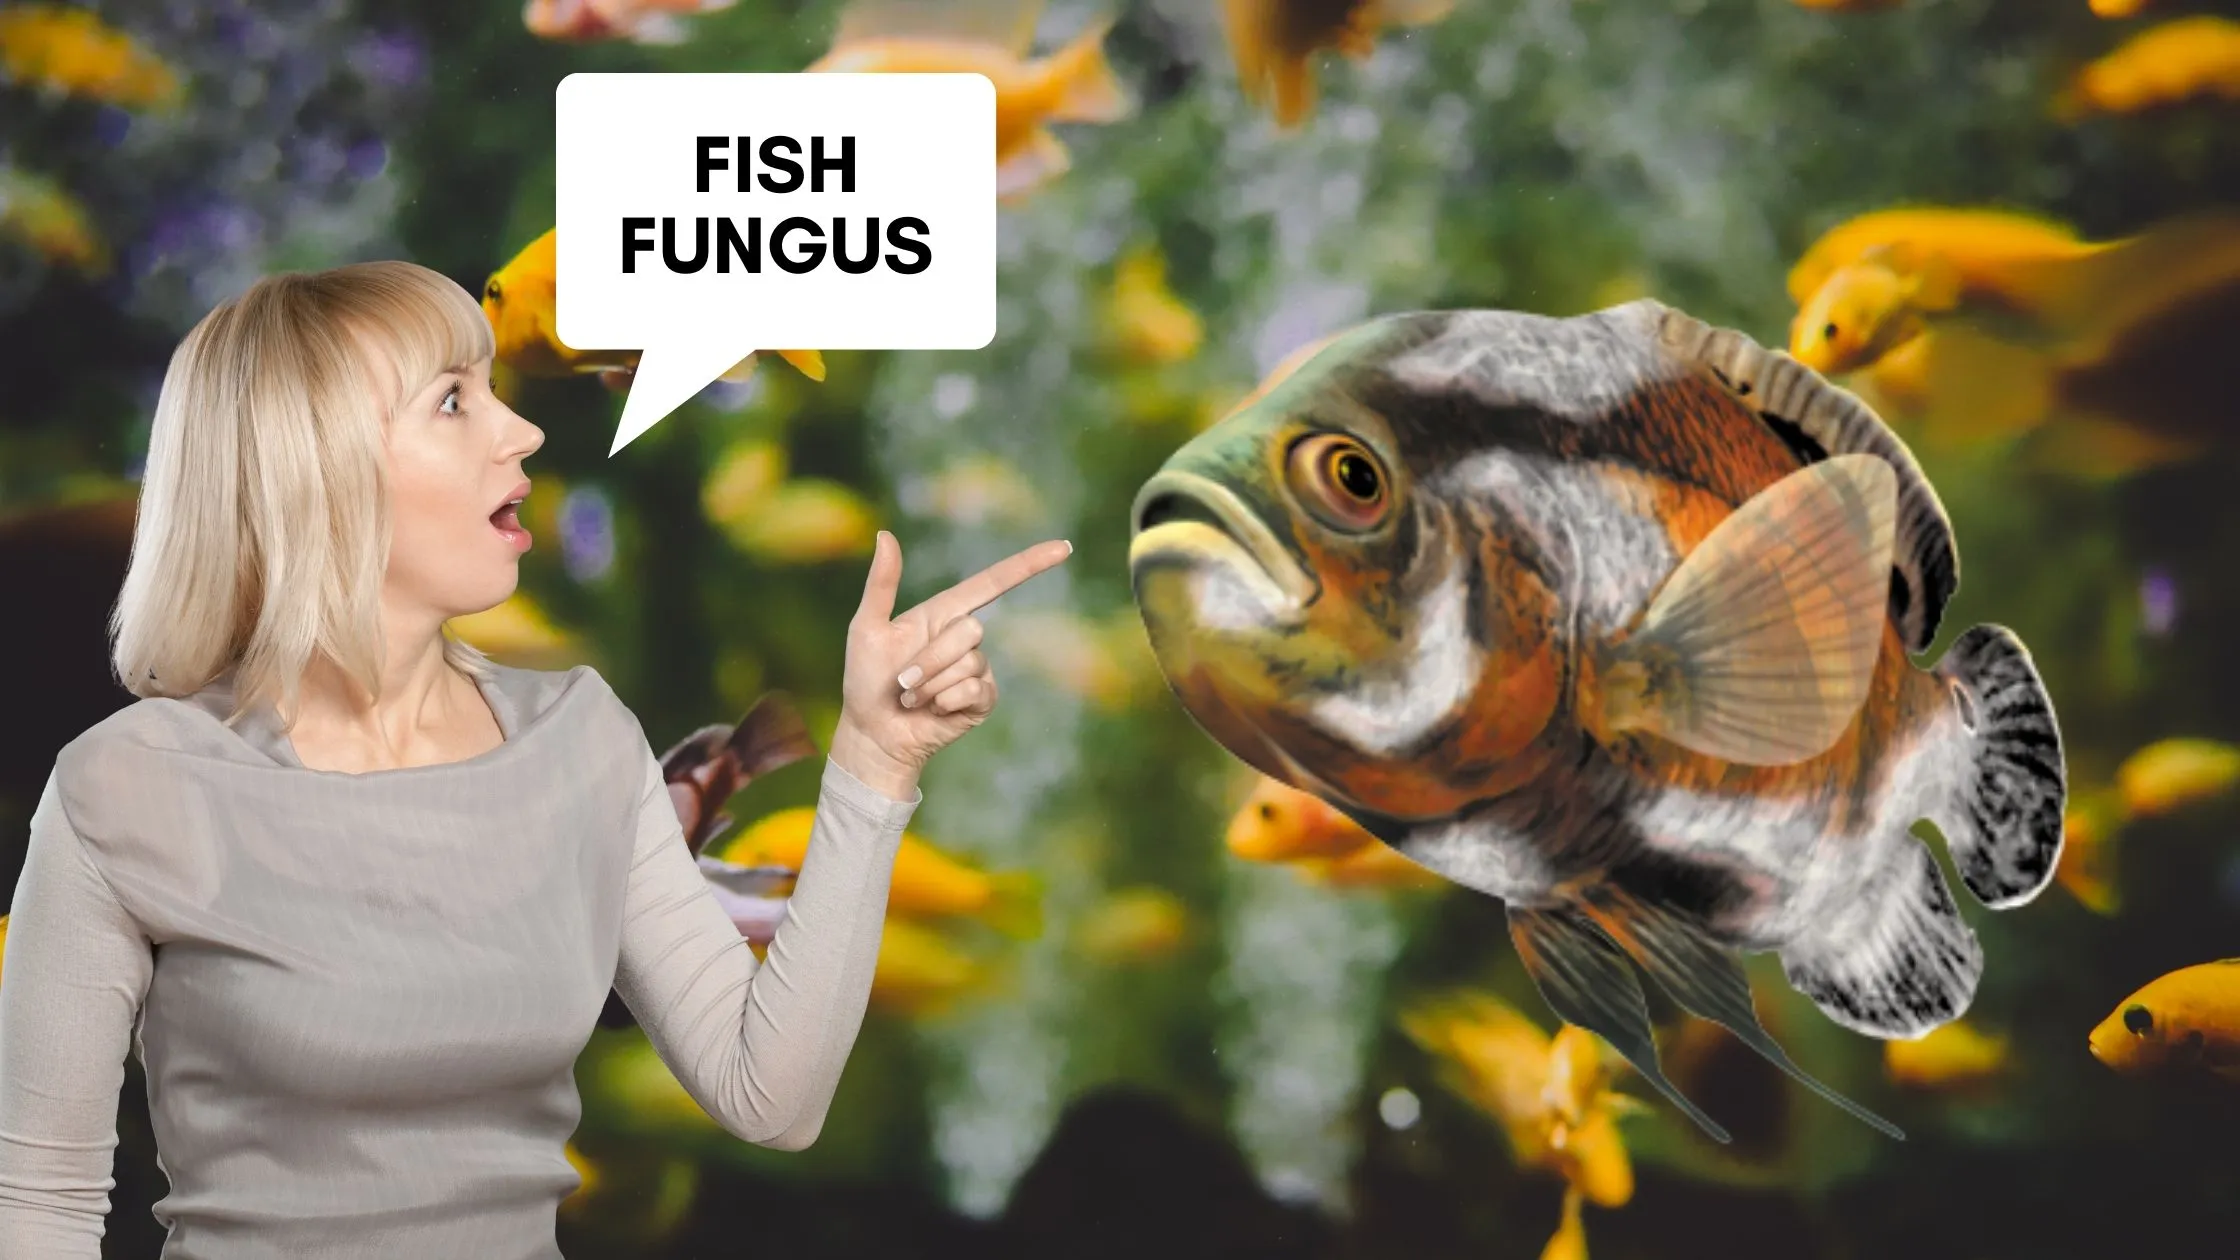 How to Cure Fish fungus